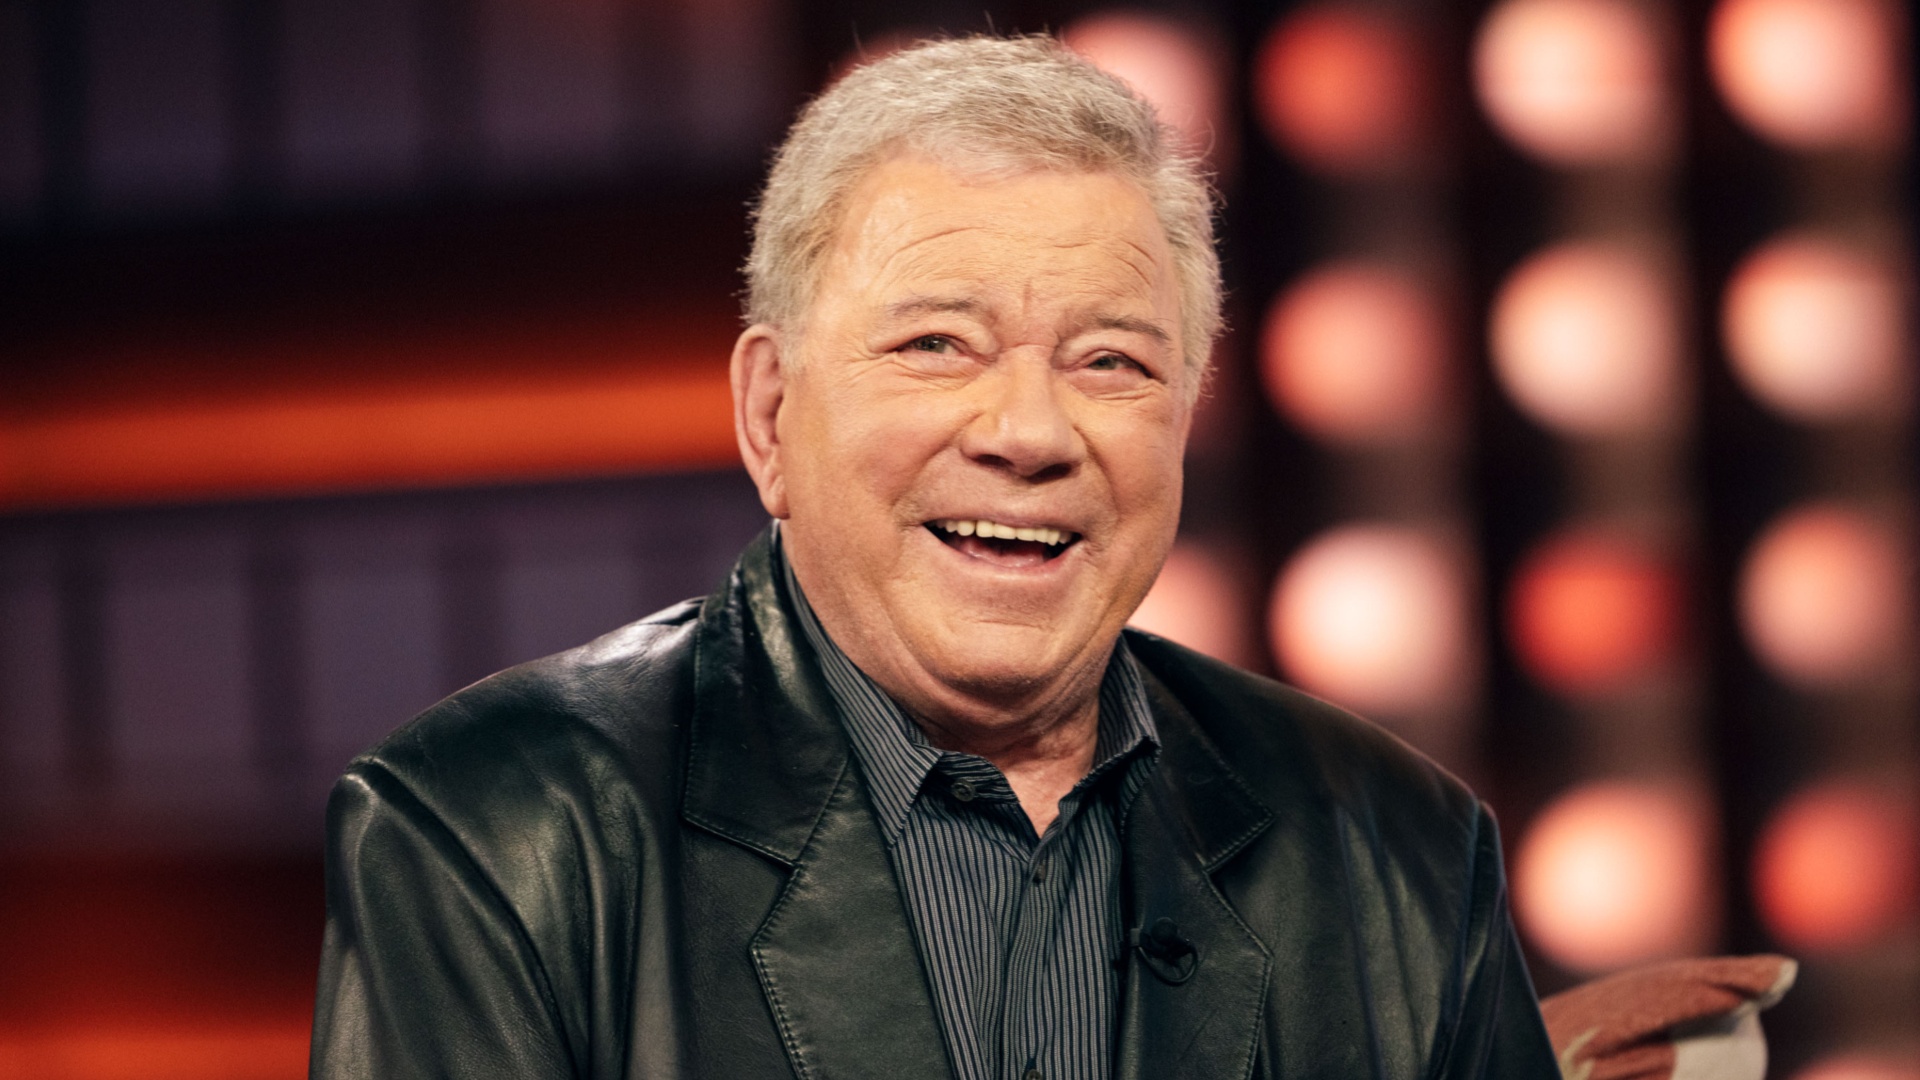 William Shatner Is Willing to Come Back to Star Trek as A Younger Kirk with Digital De-Aging